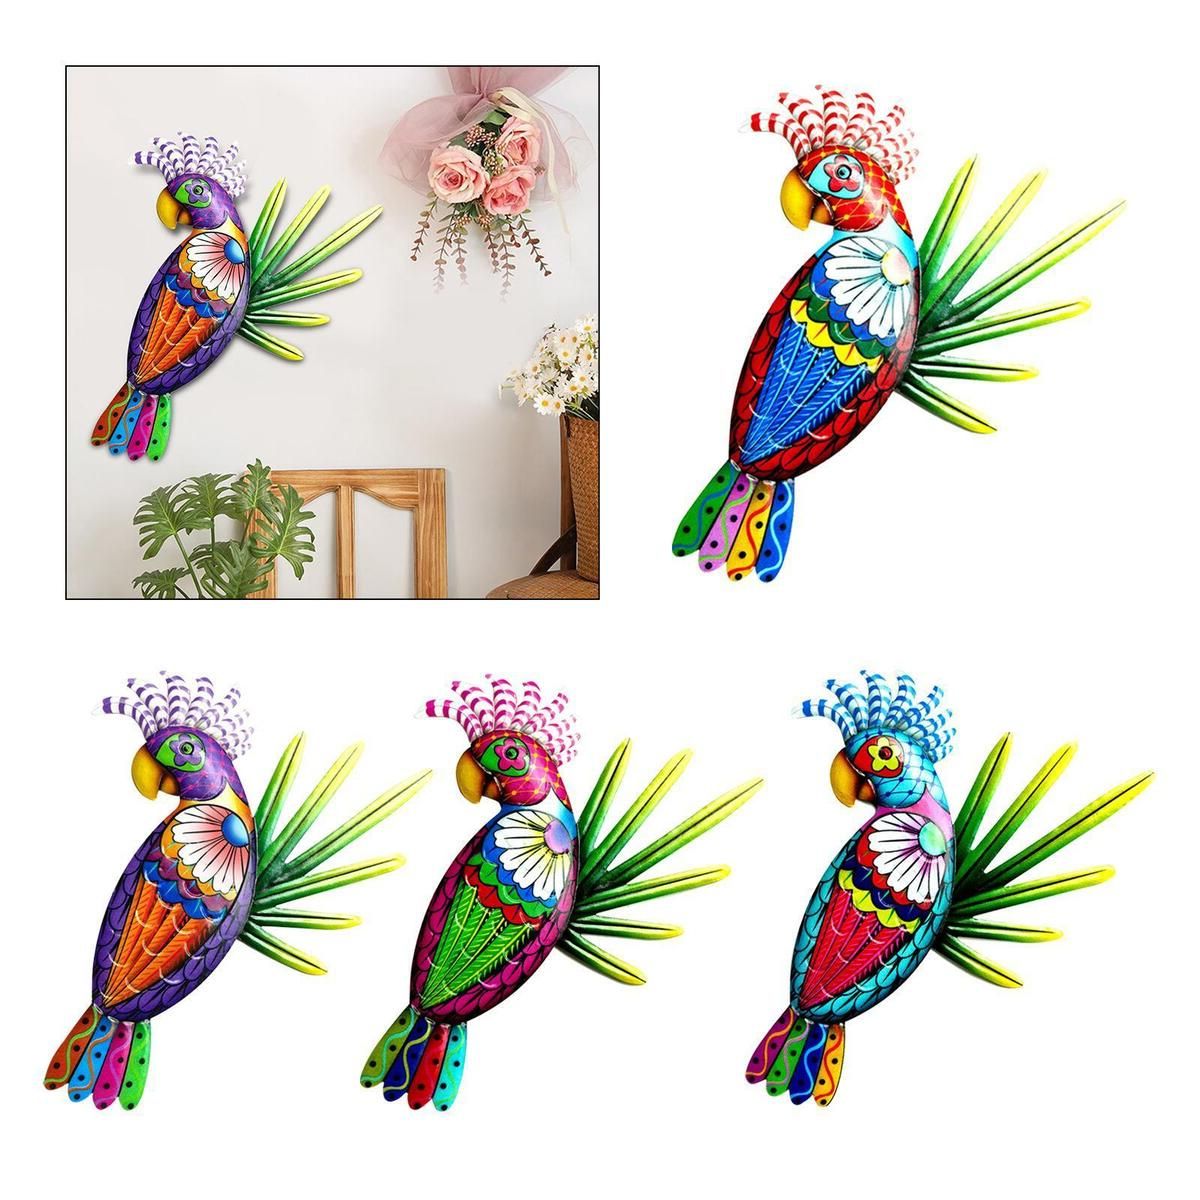 Ebay Pertaining To Preferred 3d Metal Colorful Birds Sculptures (View 10 of 15)